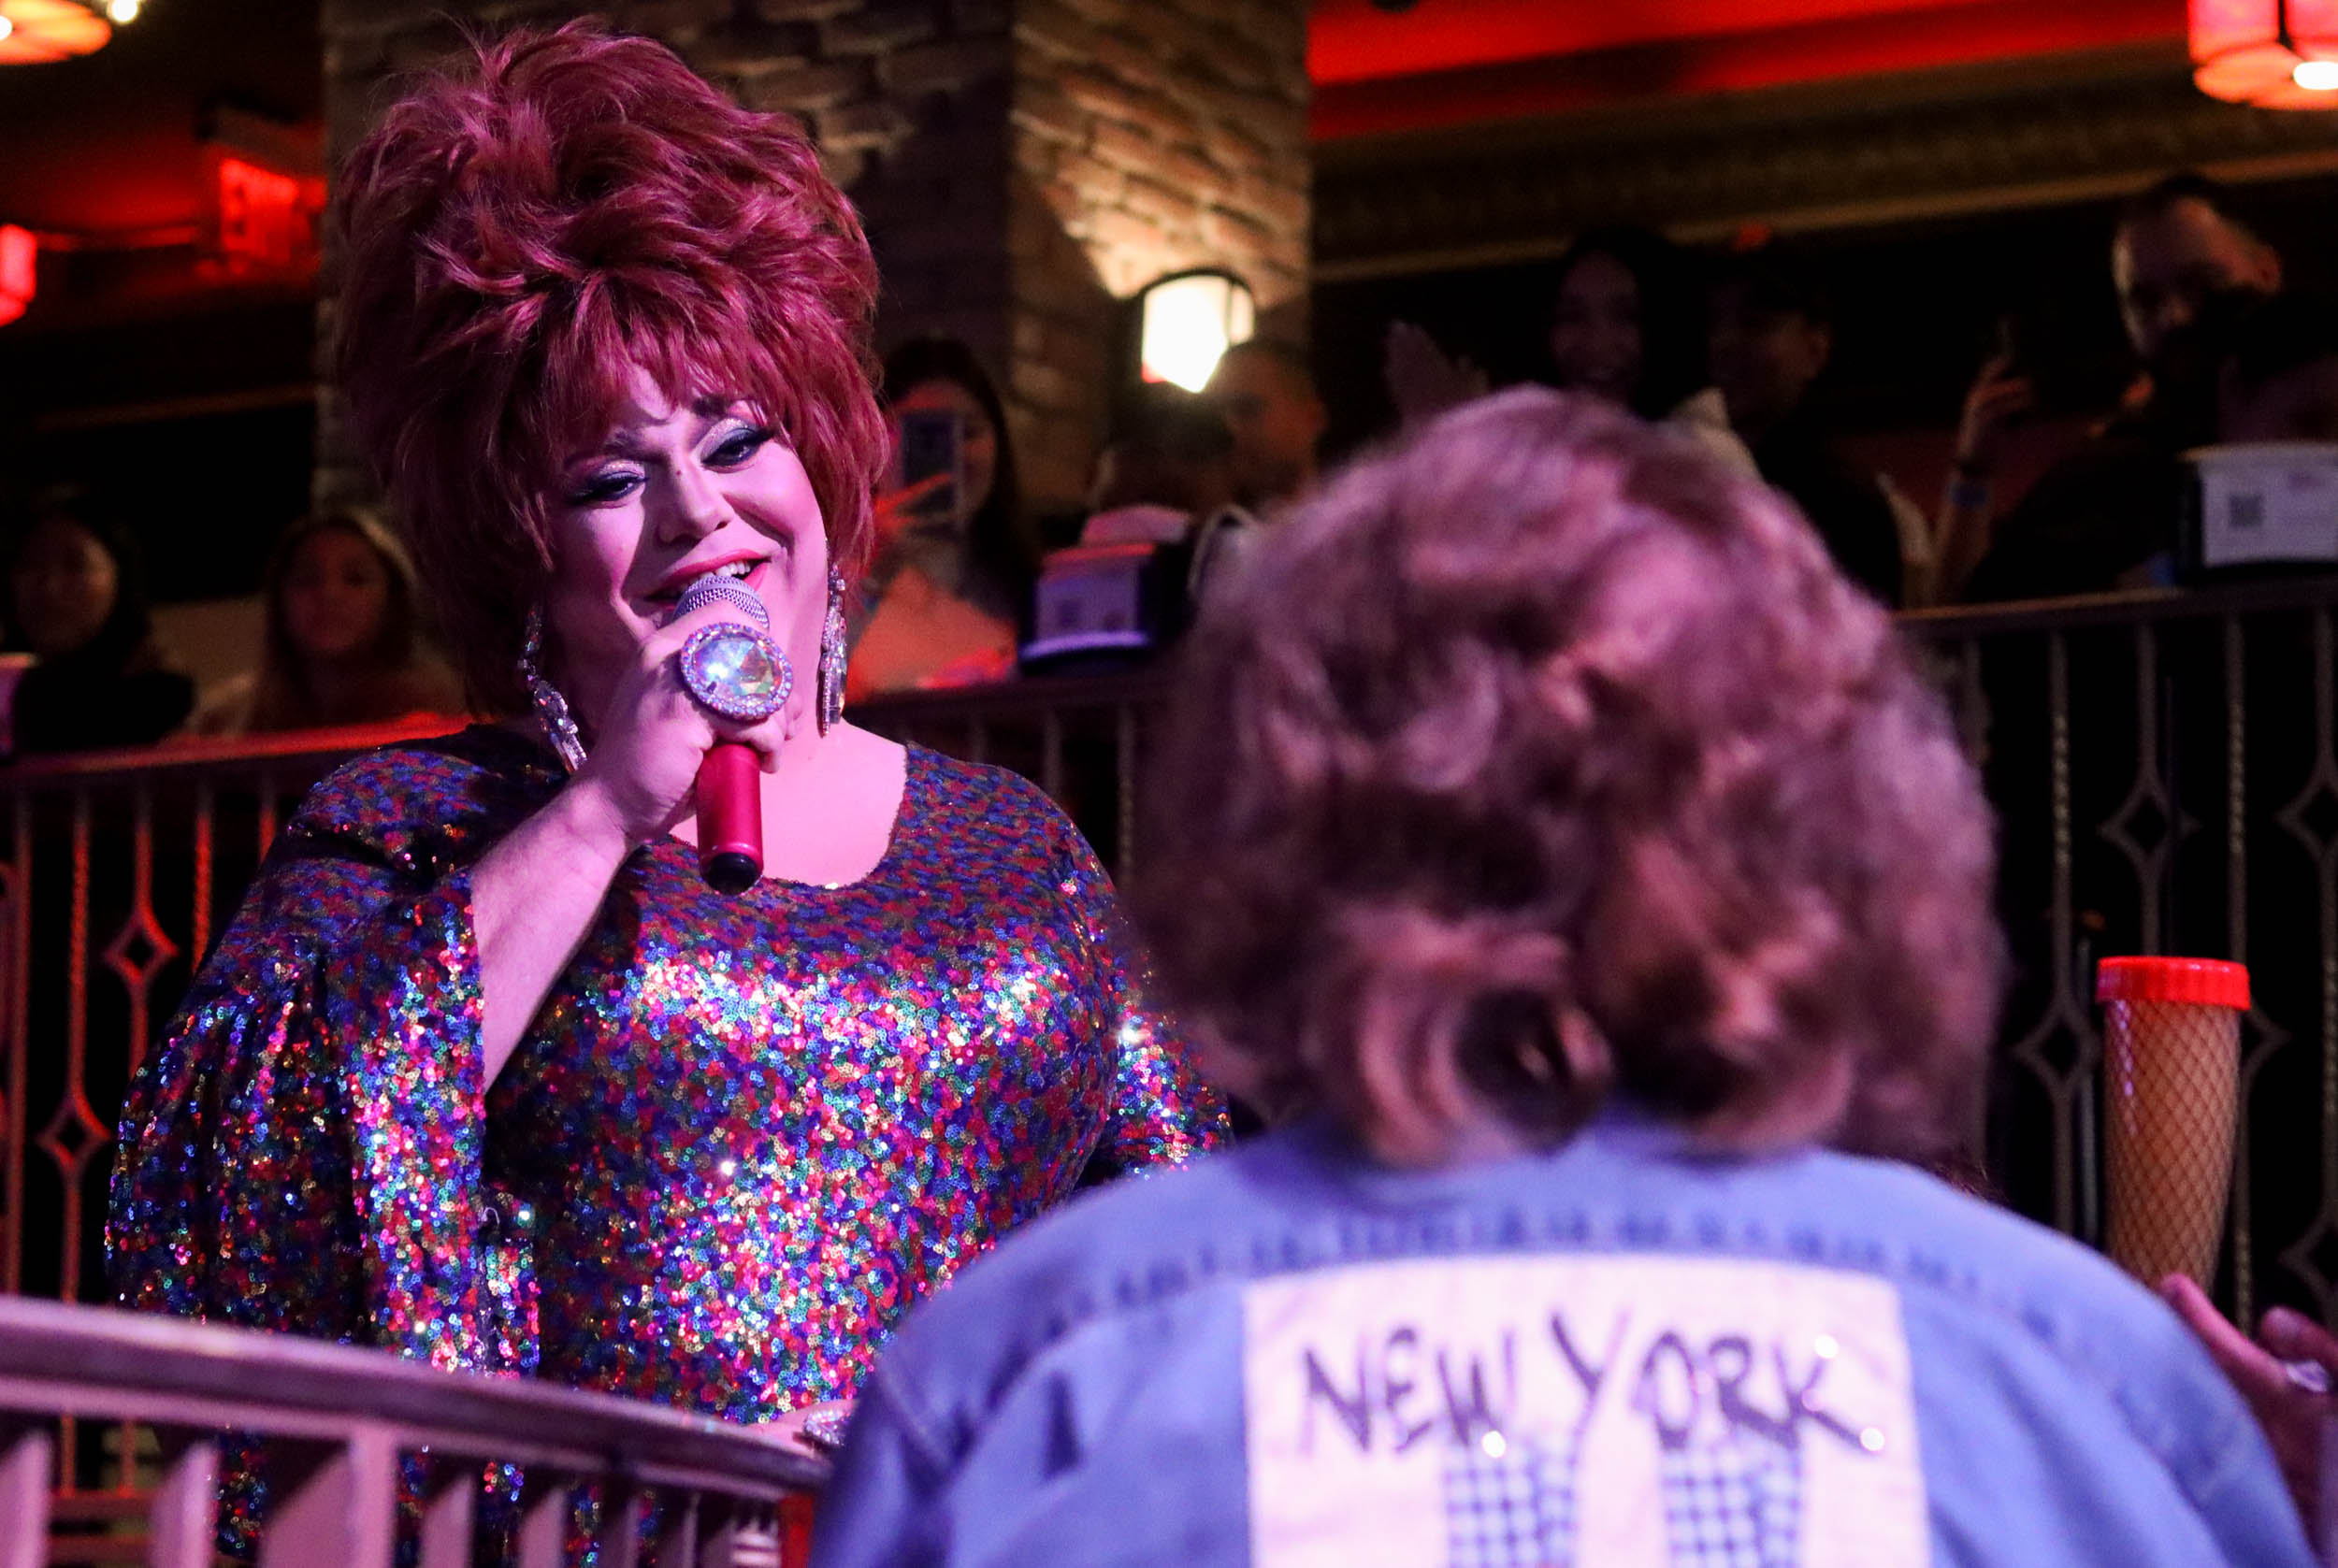 A red headed drag queen in the spotlight dressed in a sequined, colorful top sings to customer. A person sits in the foreground with her back to the camera, with curly hair and a denim jacket with a ‘New York’ patch on the back.